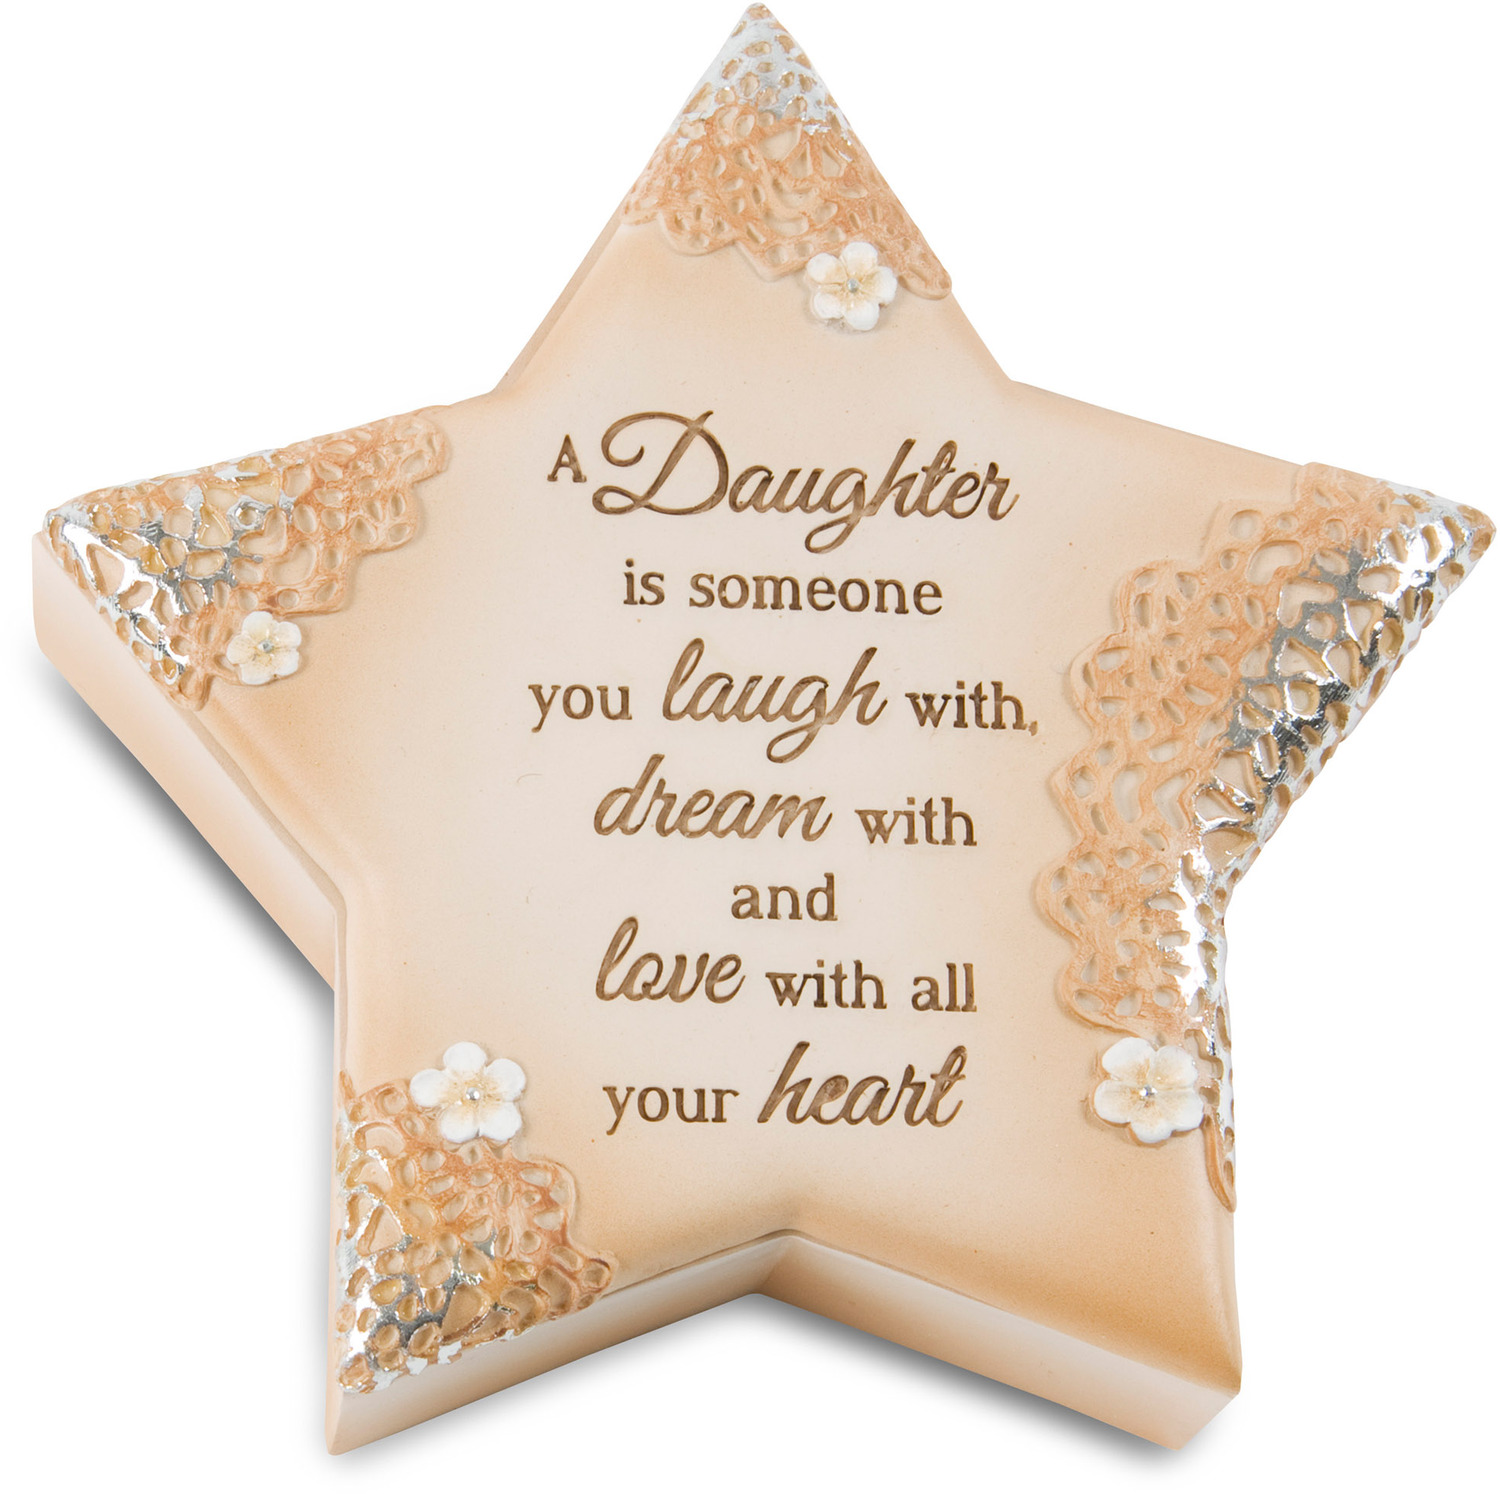 Daughter by Light Your Way Every Day - Daughter - 4" x 3.75" Star Keepsake Box